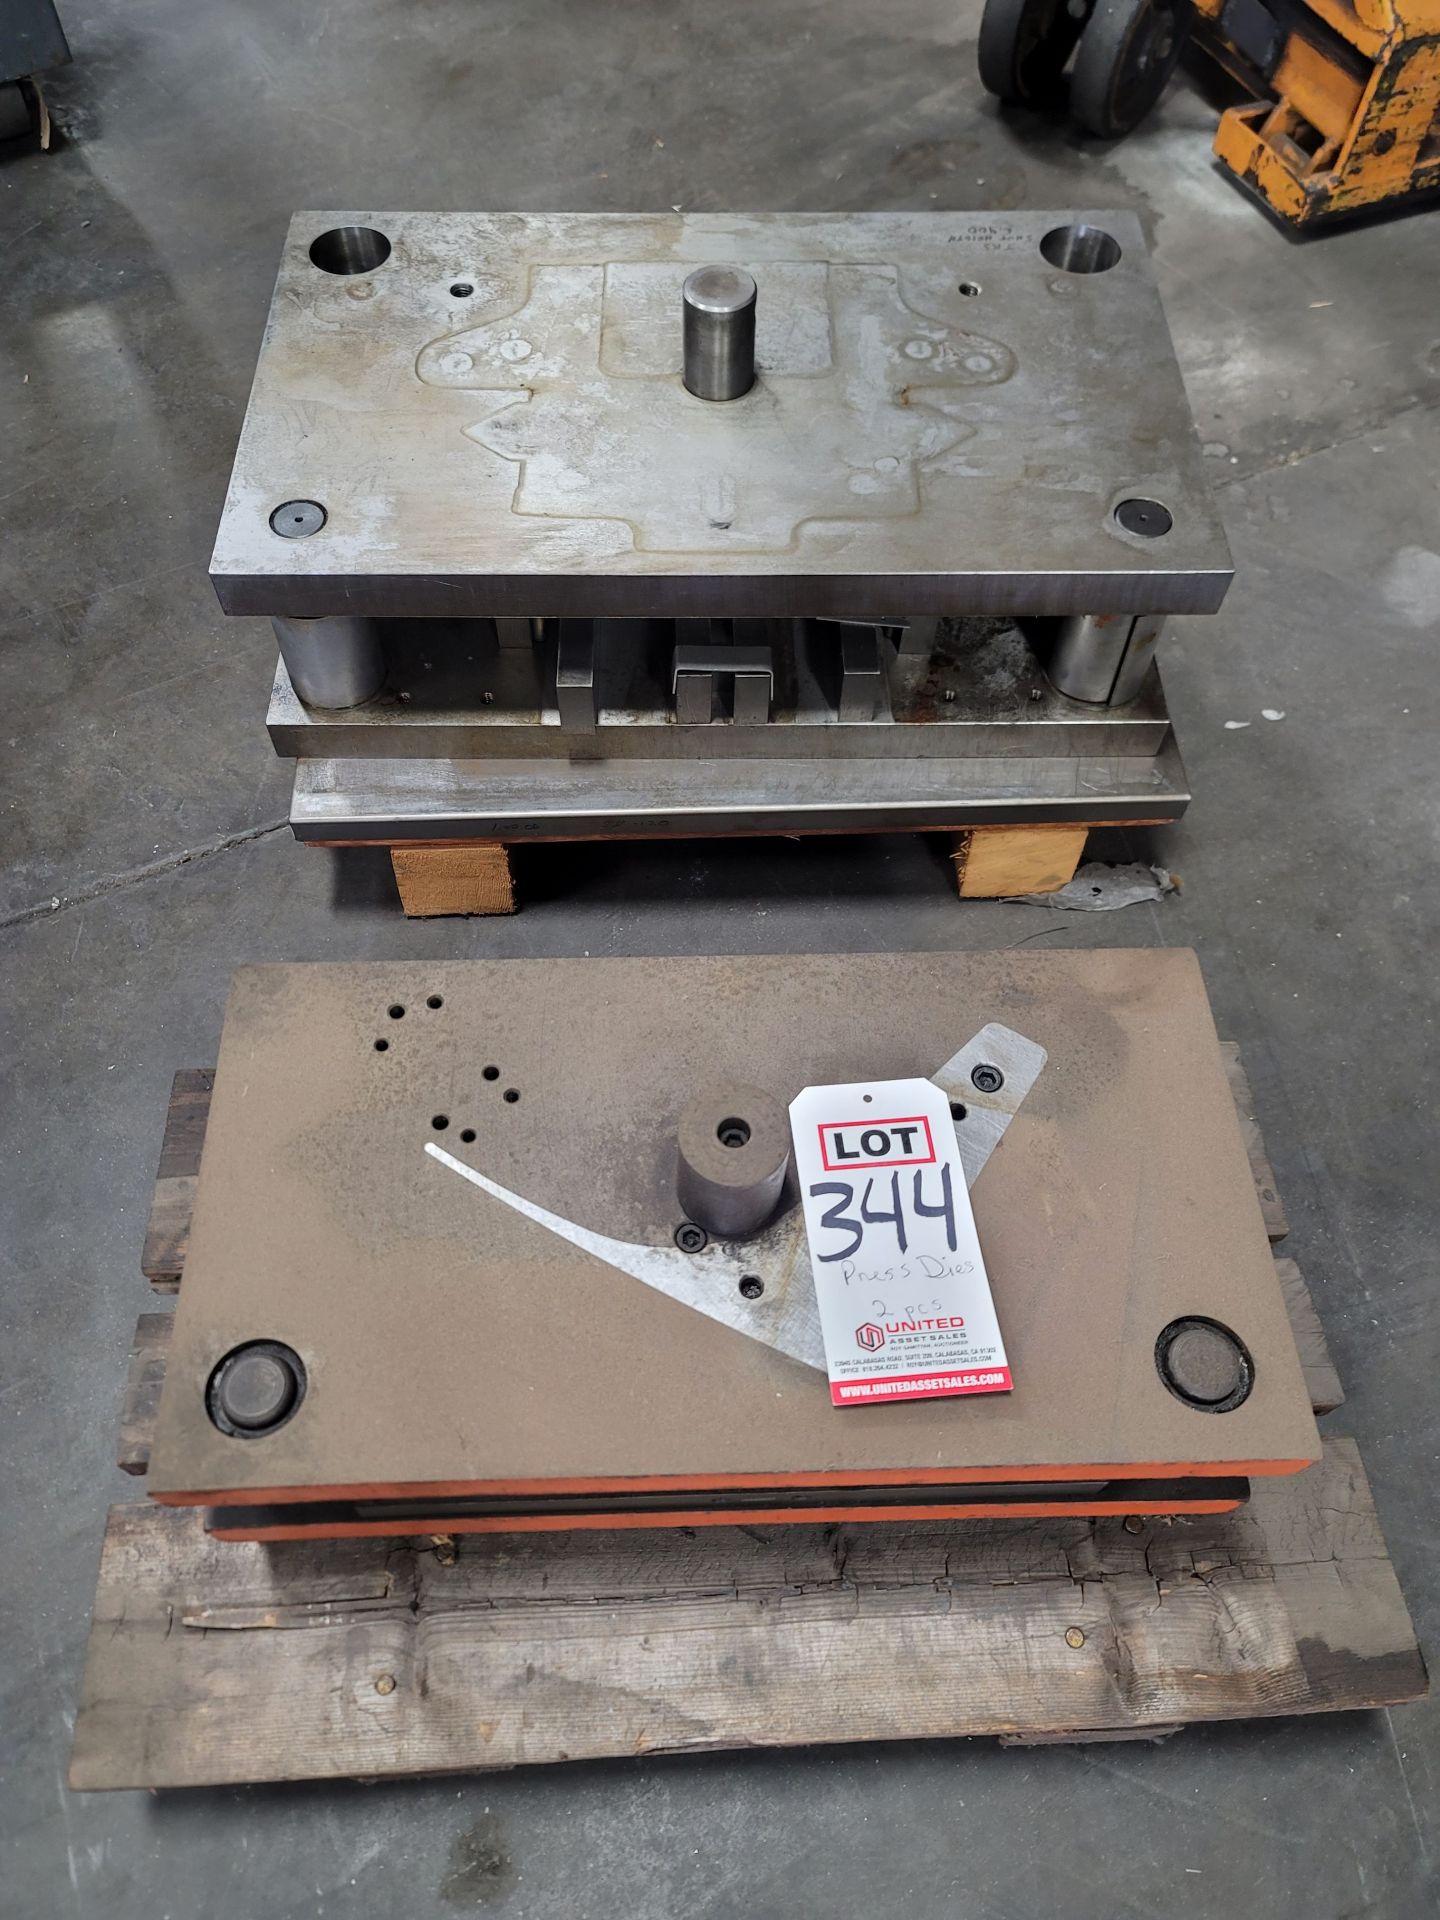 LOT - (2) PUNCH PRESS DIES: (1) 16" X 26" AND (1) 10-1/2" X 20"